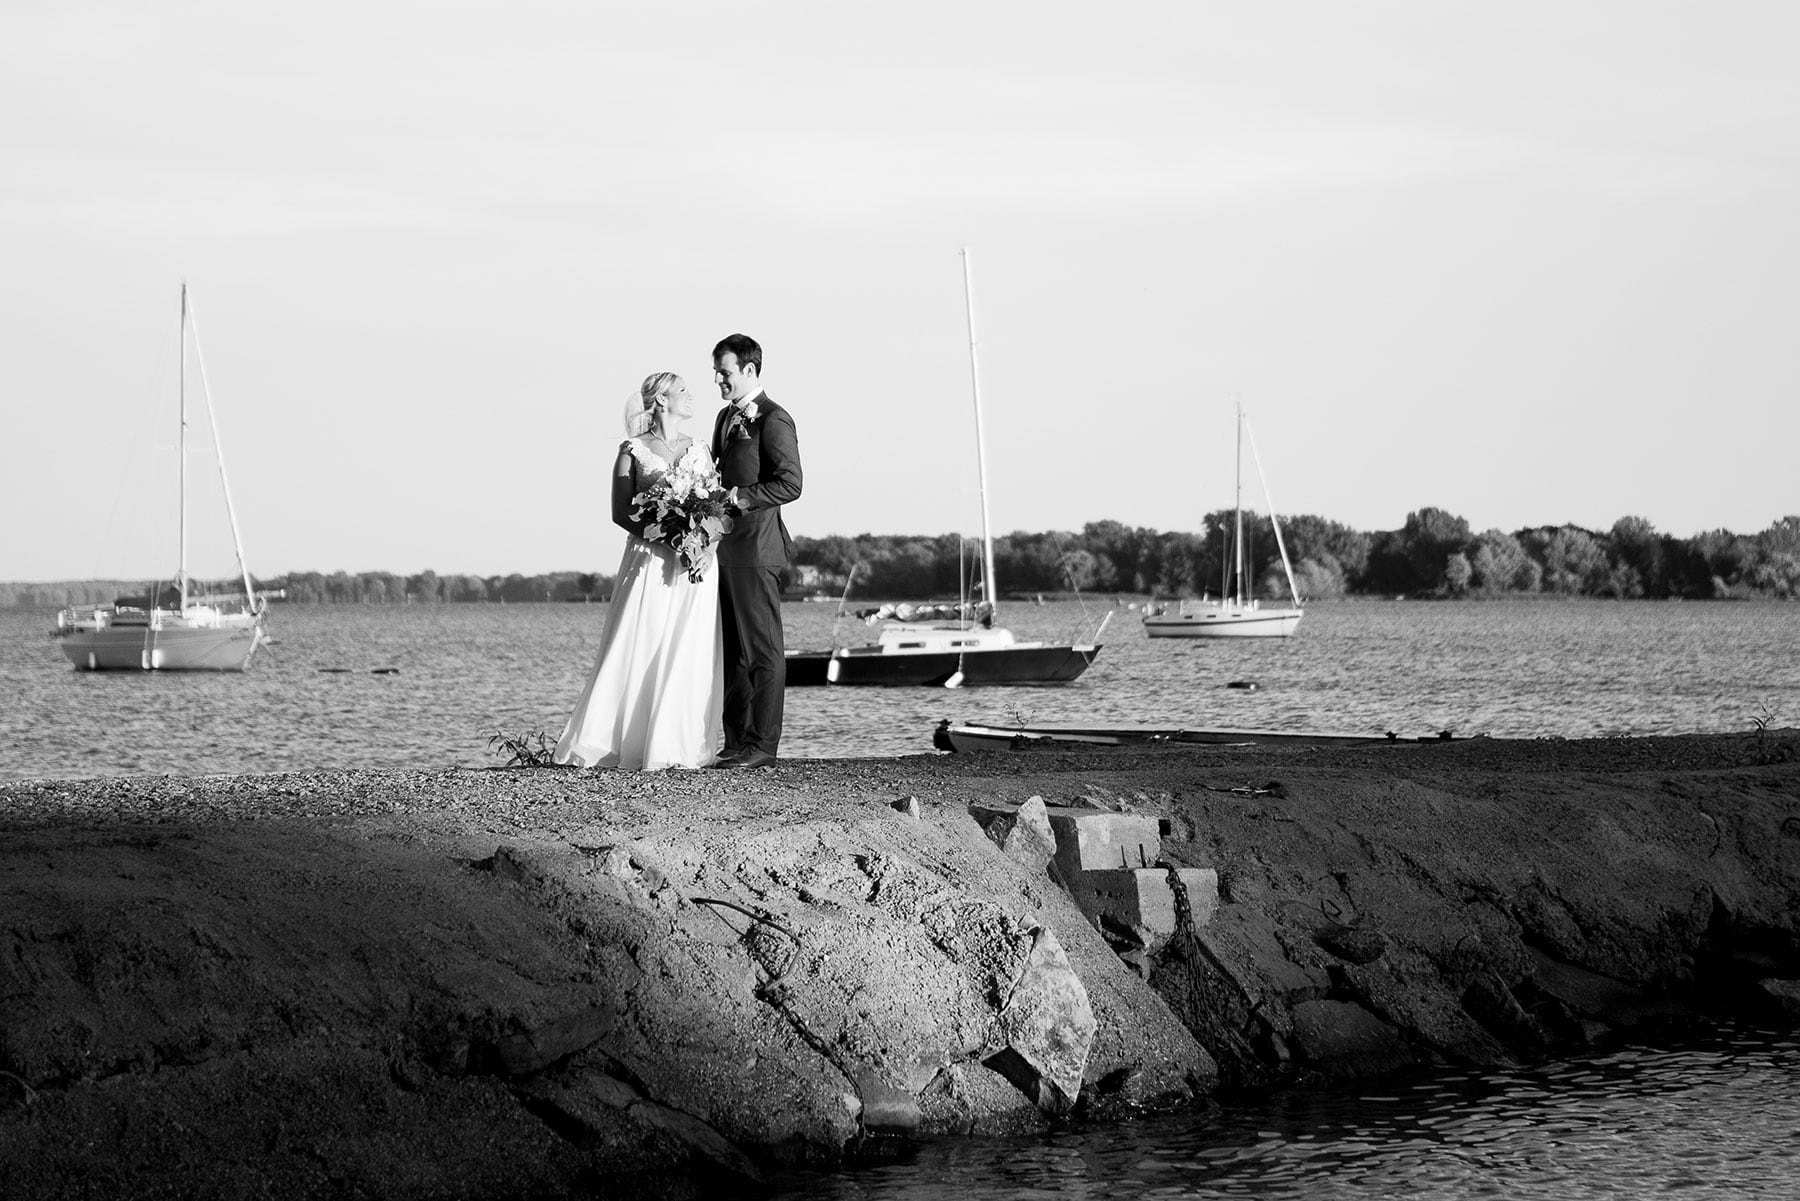 Black and white image of a newlywed couple standing on a rock